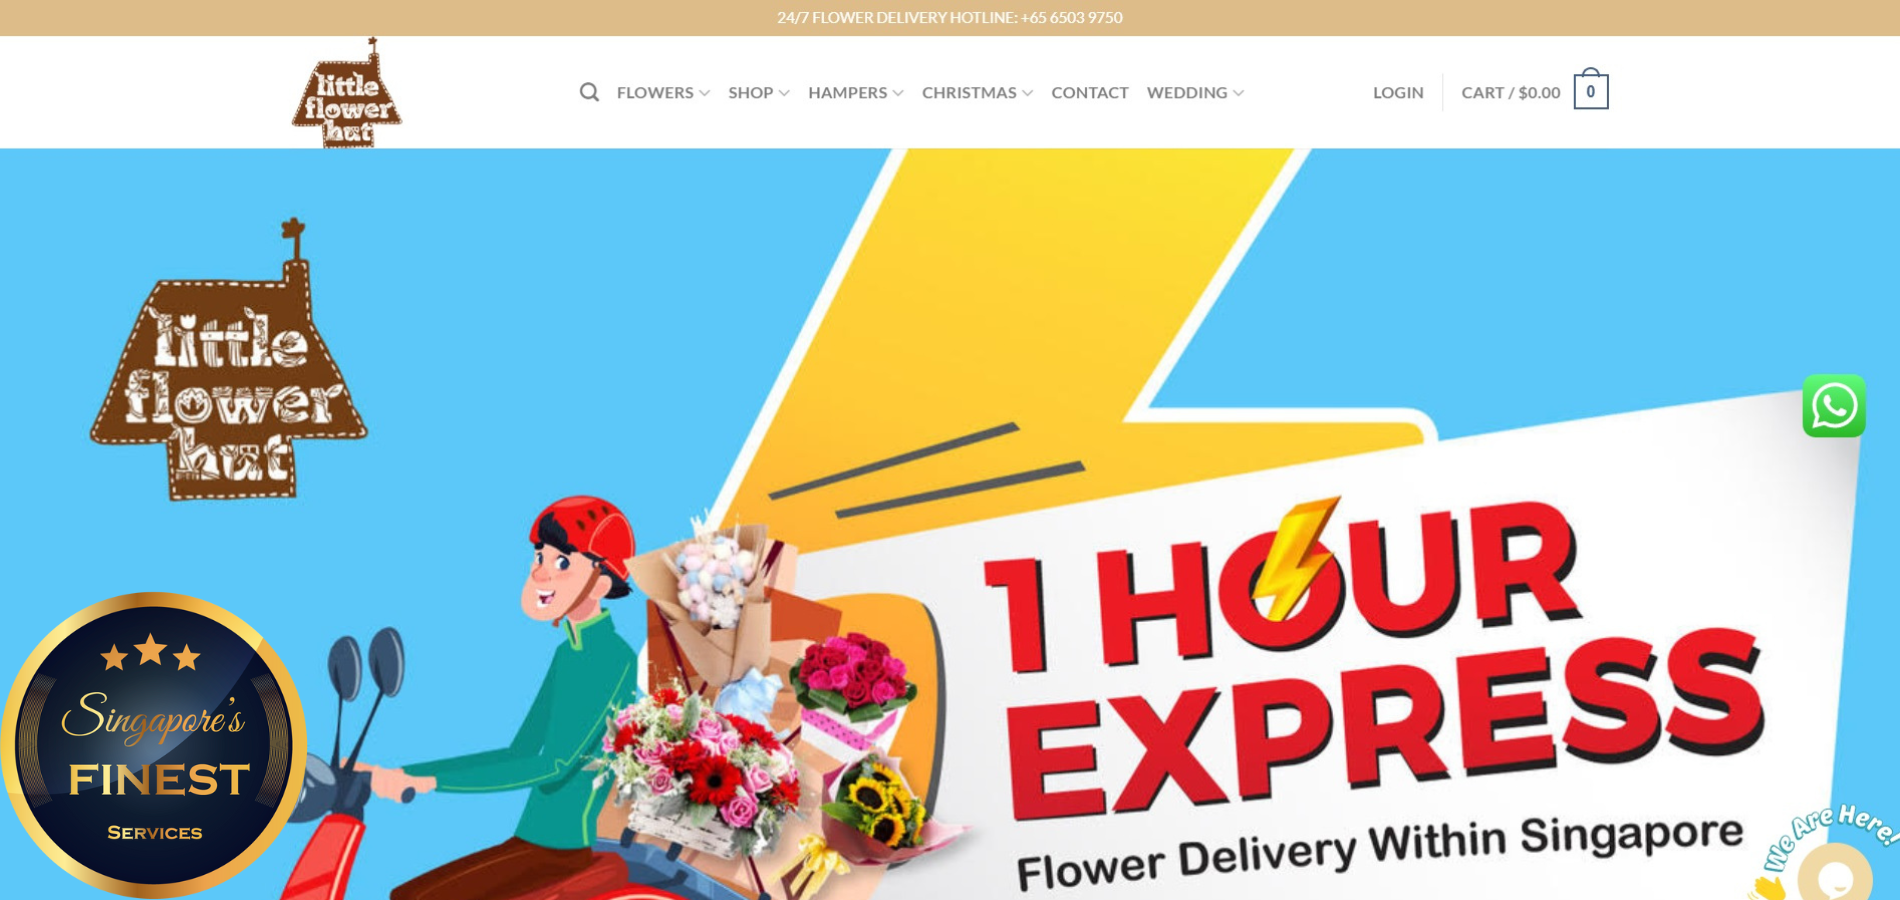 The Finest Flower Delivery Services in Singapore